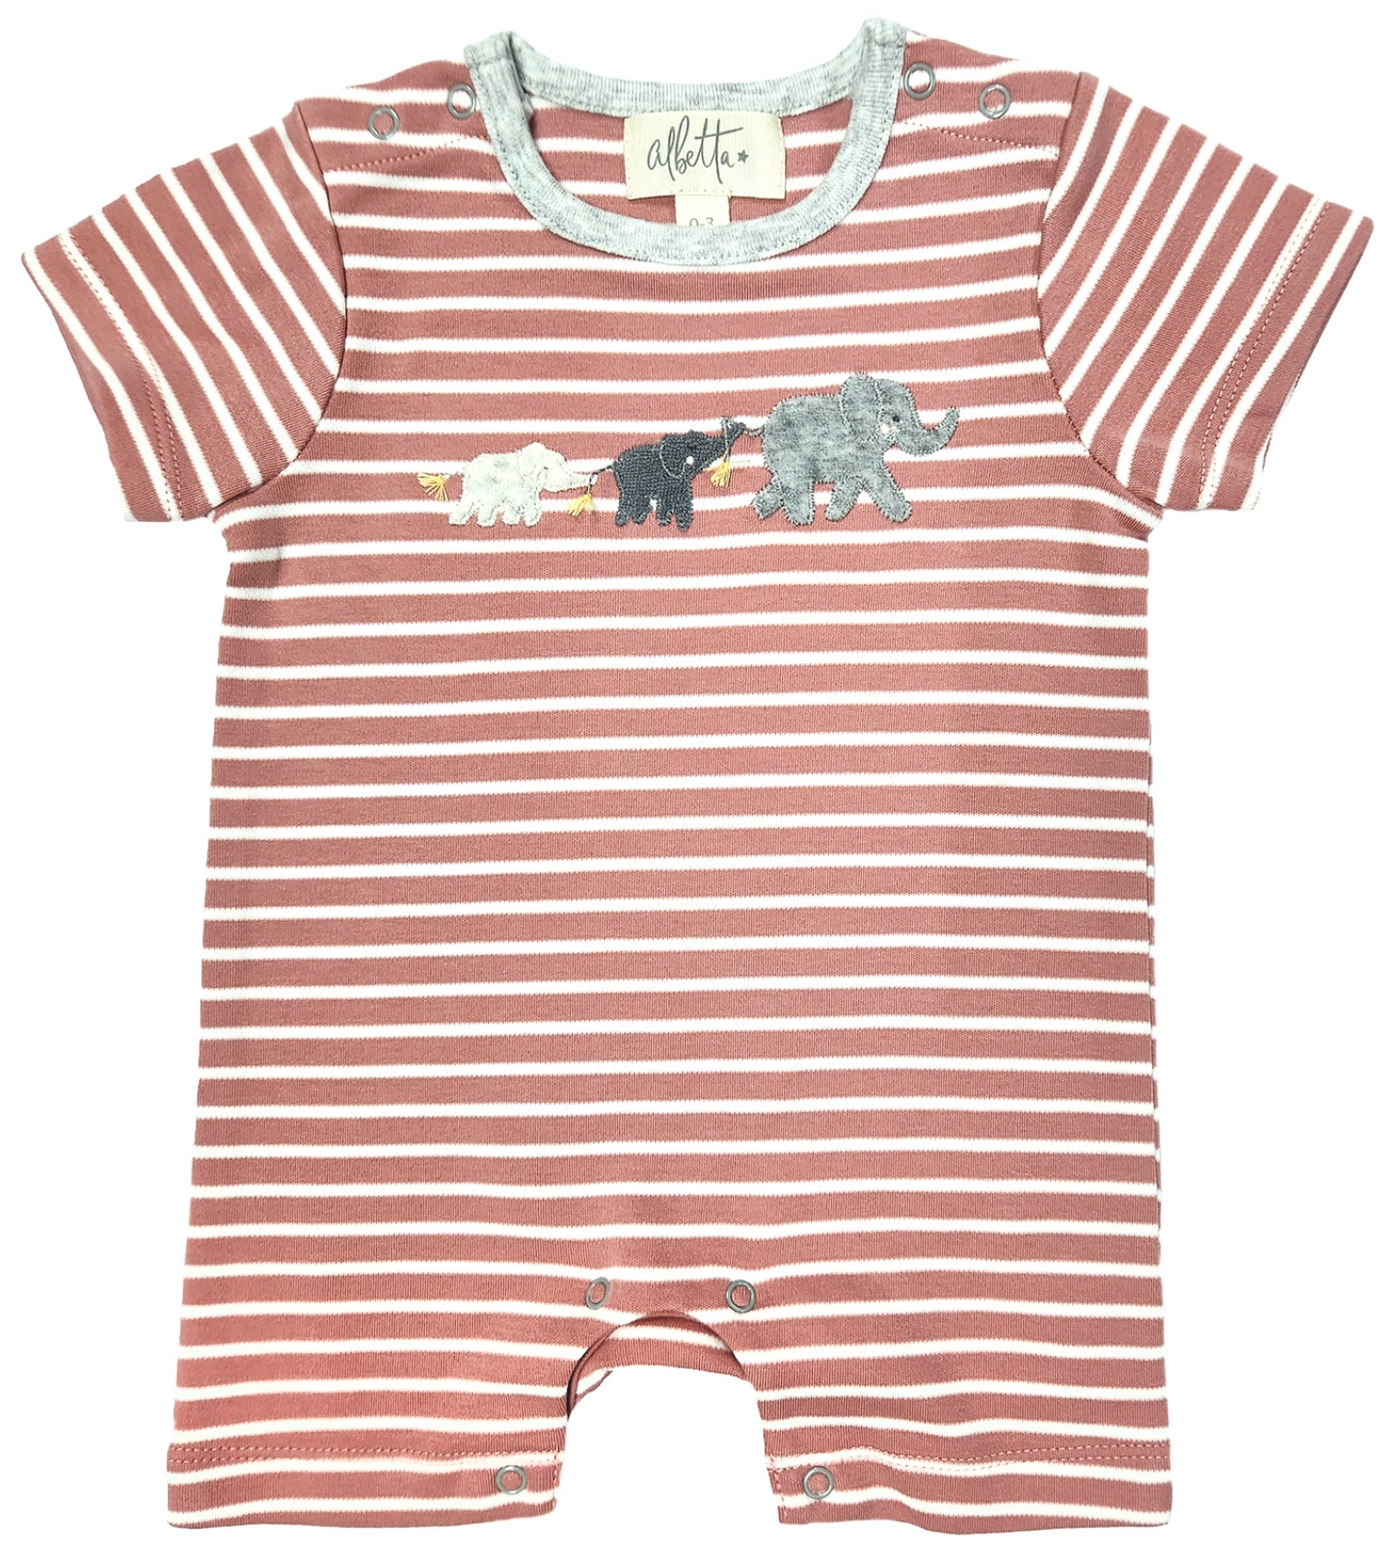 ROMPER ELEPHANTS RED/WHITE STRIPE (Available in 2 Sizes)